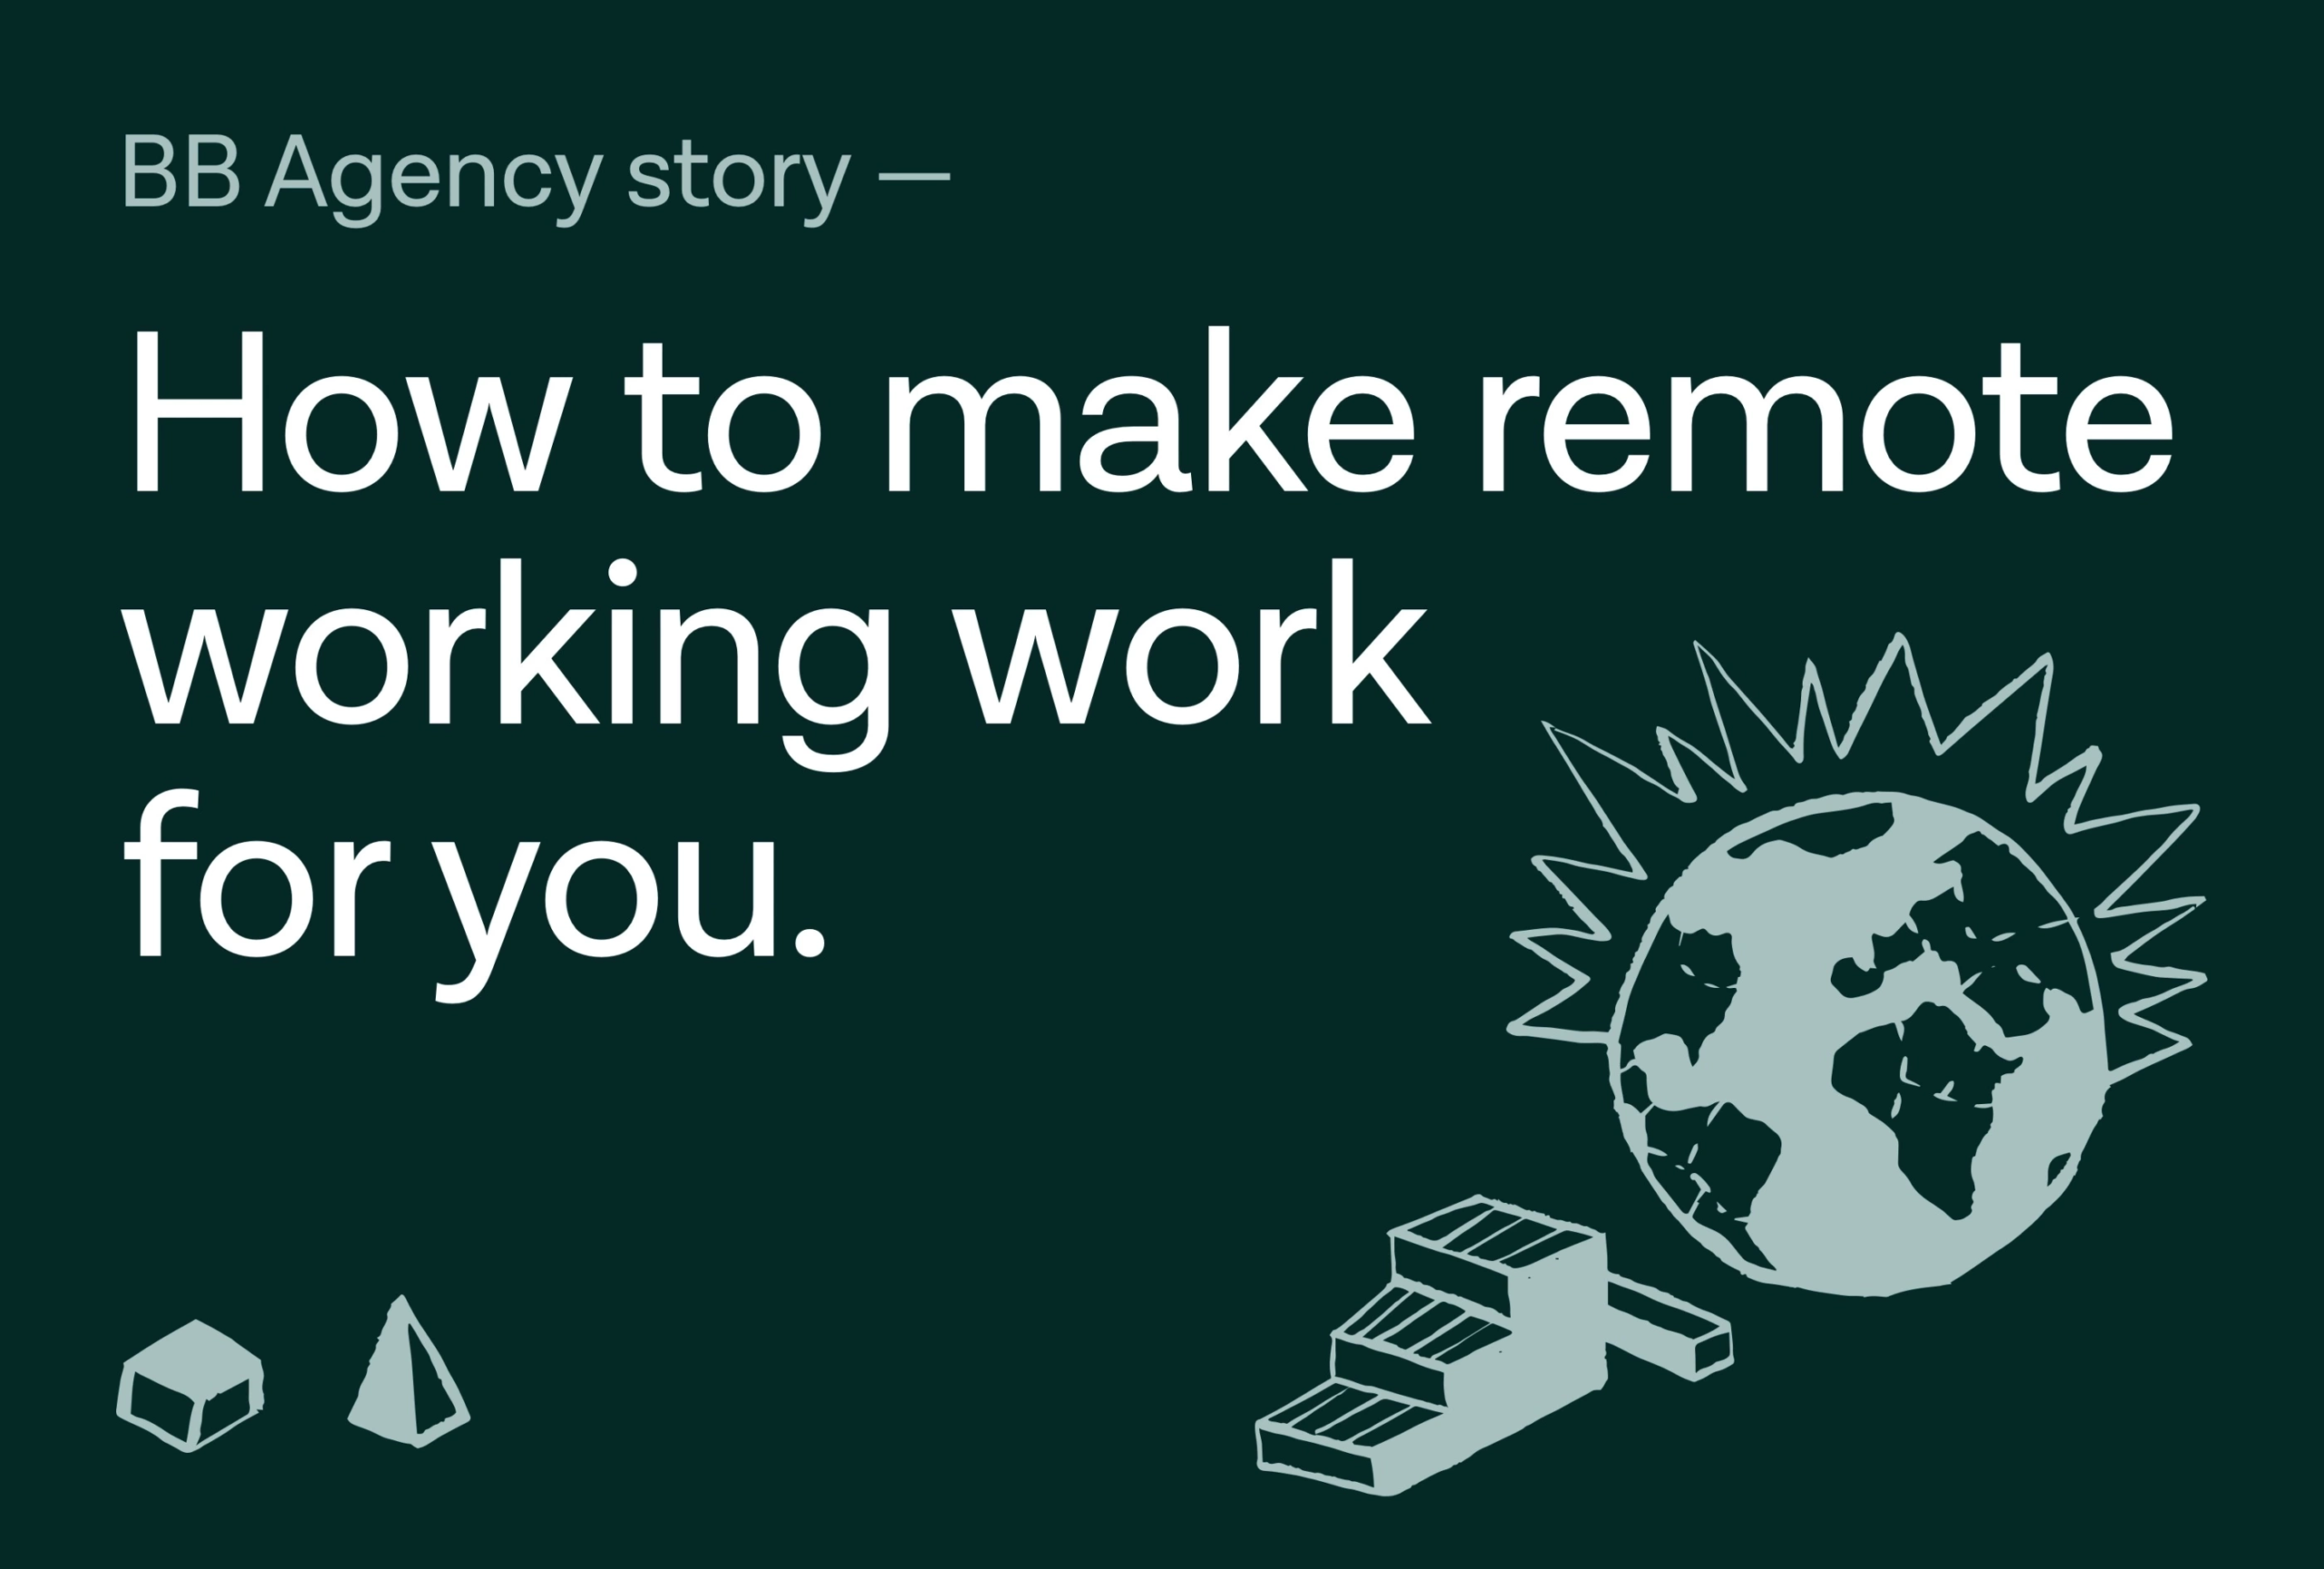 BB Agency cover visual for the article How to make remote working work for you